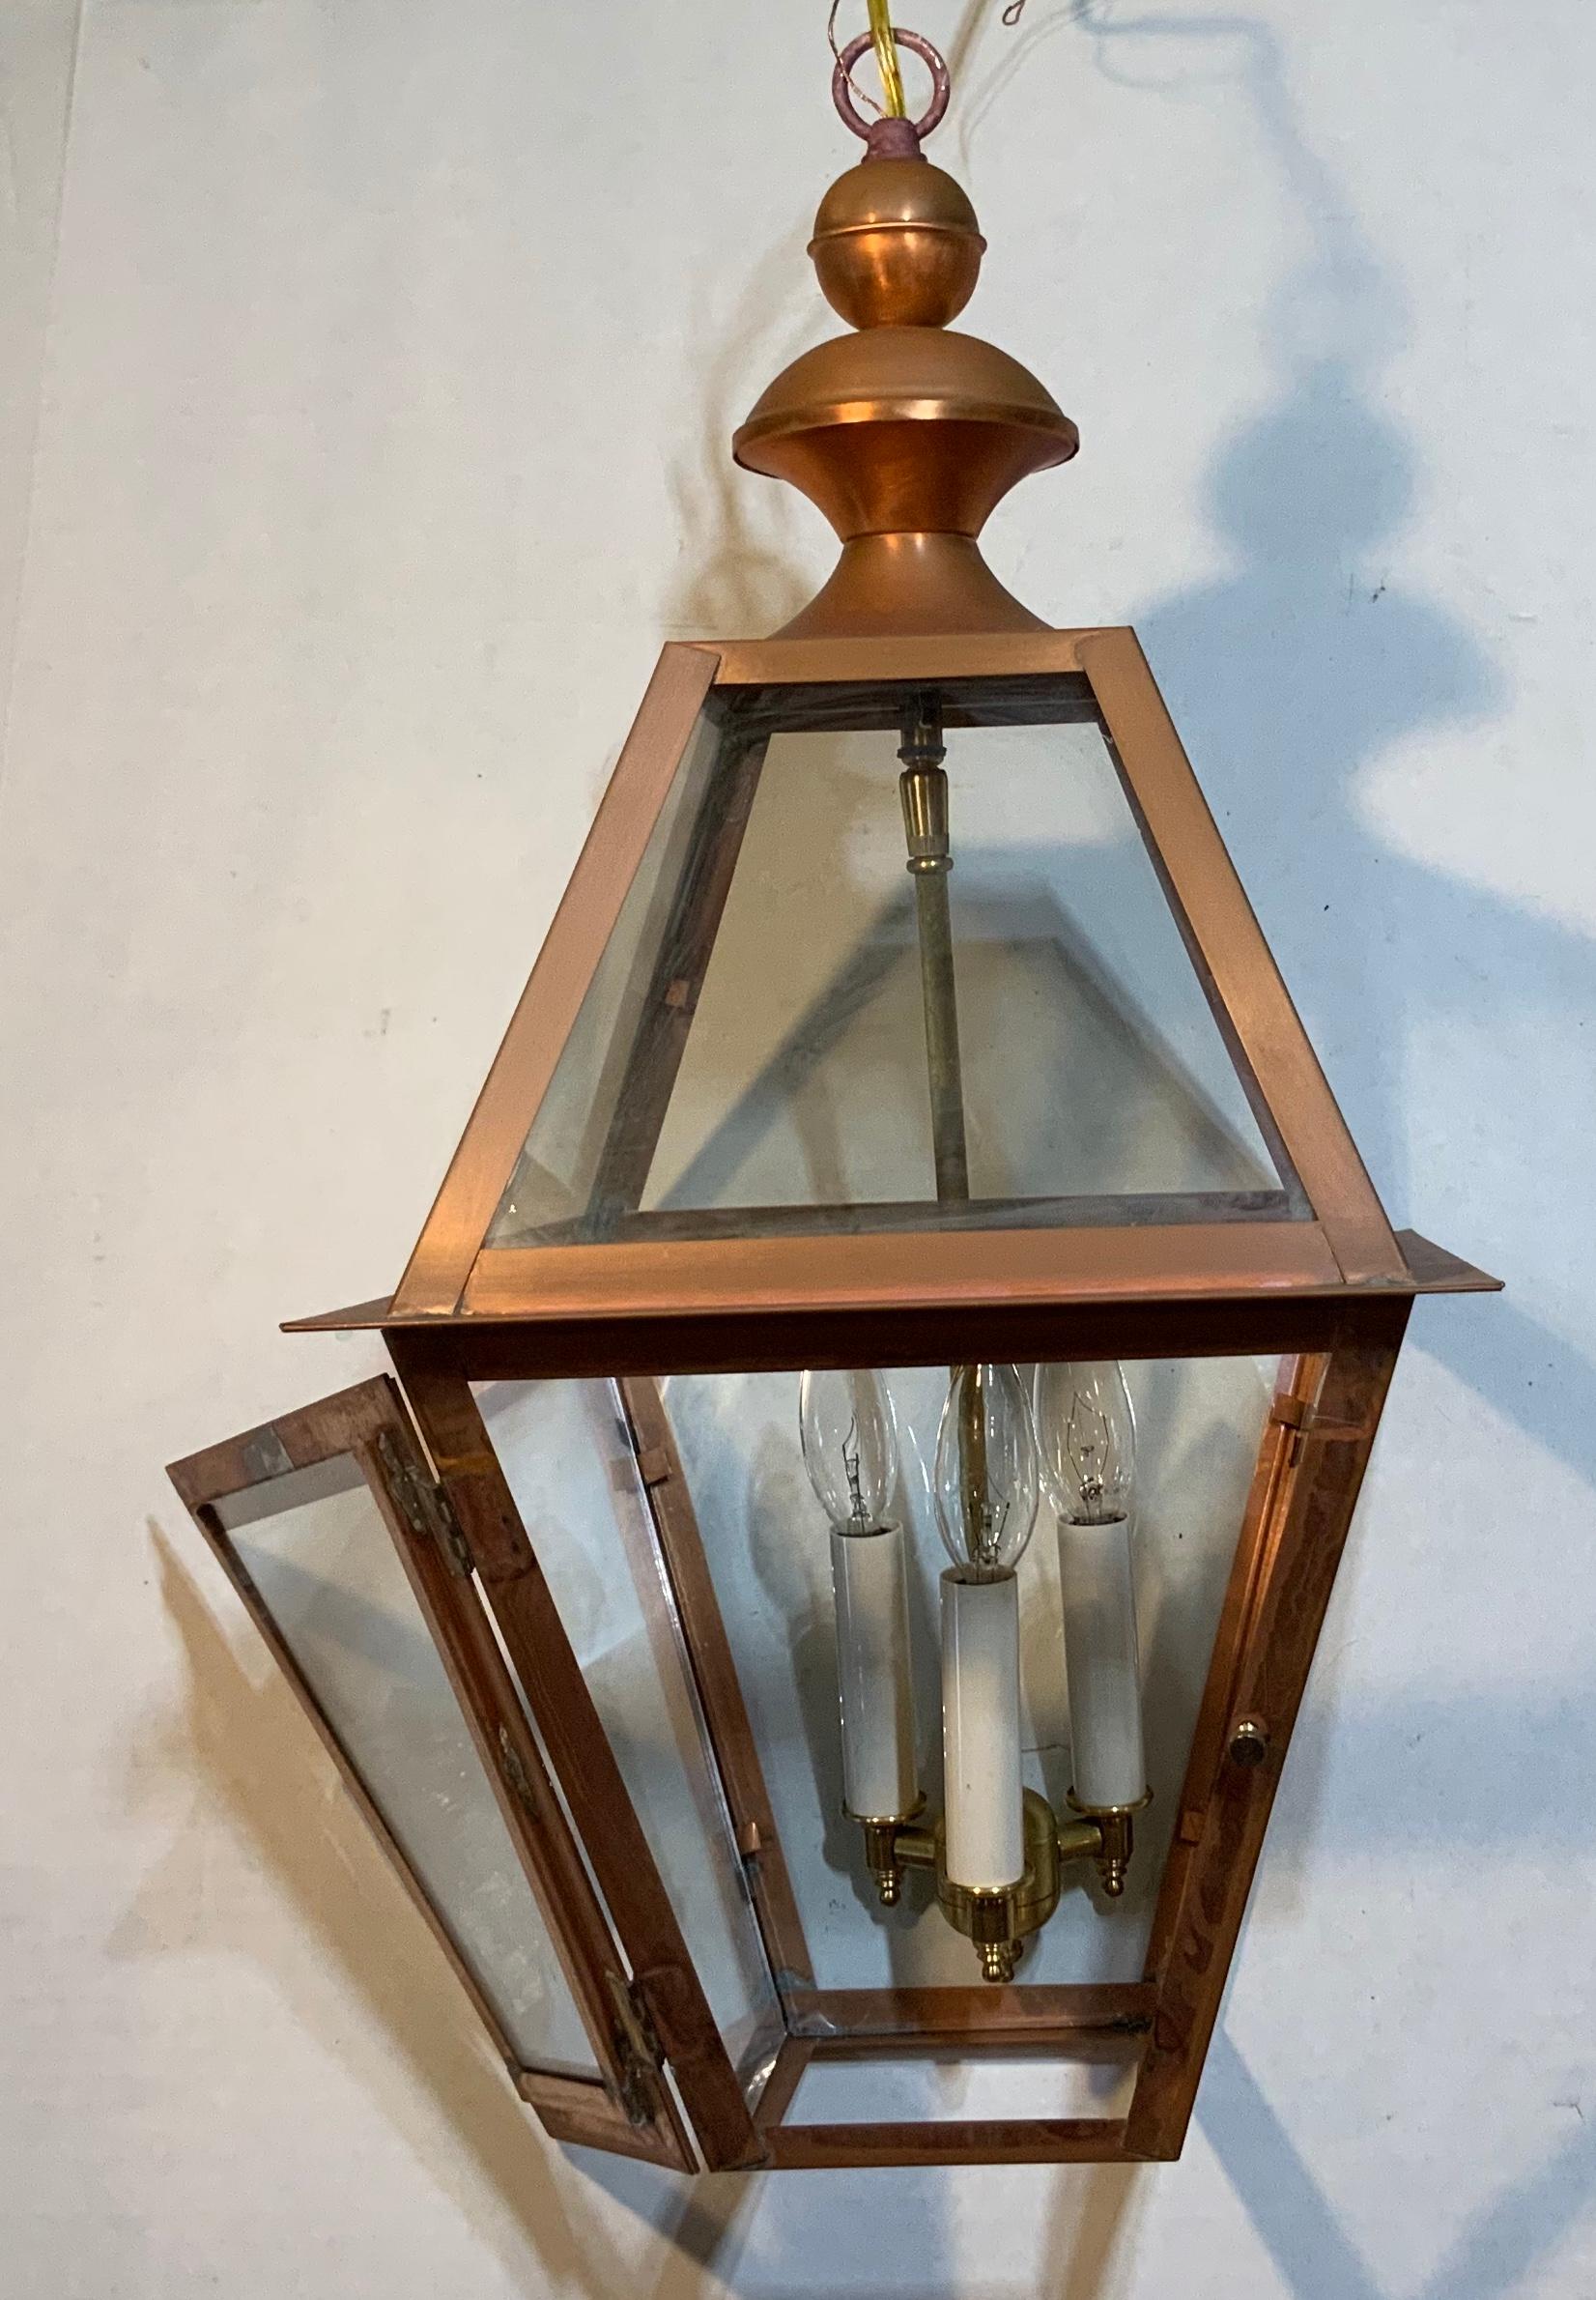 Quality handmade of copper lantern with three 60 watt lights.
Electrified and ready to light.
Made in the US and UL approved .
Could be used in wet location and inside.
Chain and canopy included.